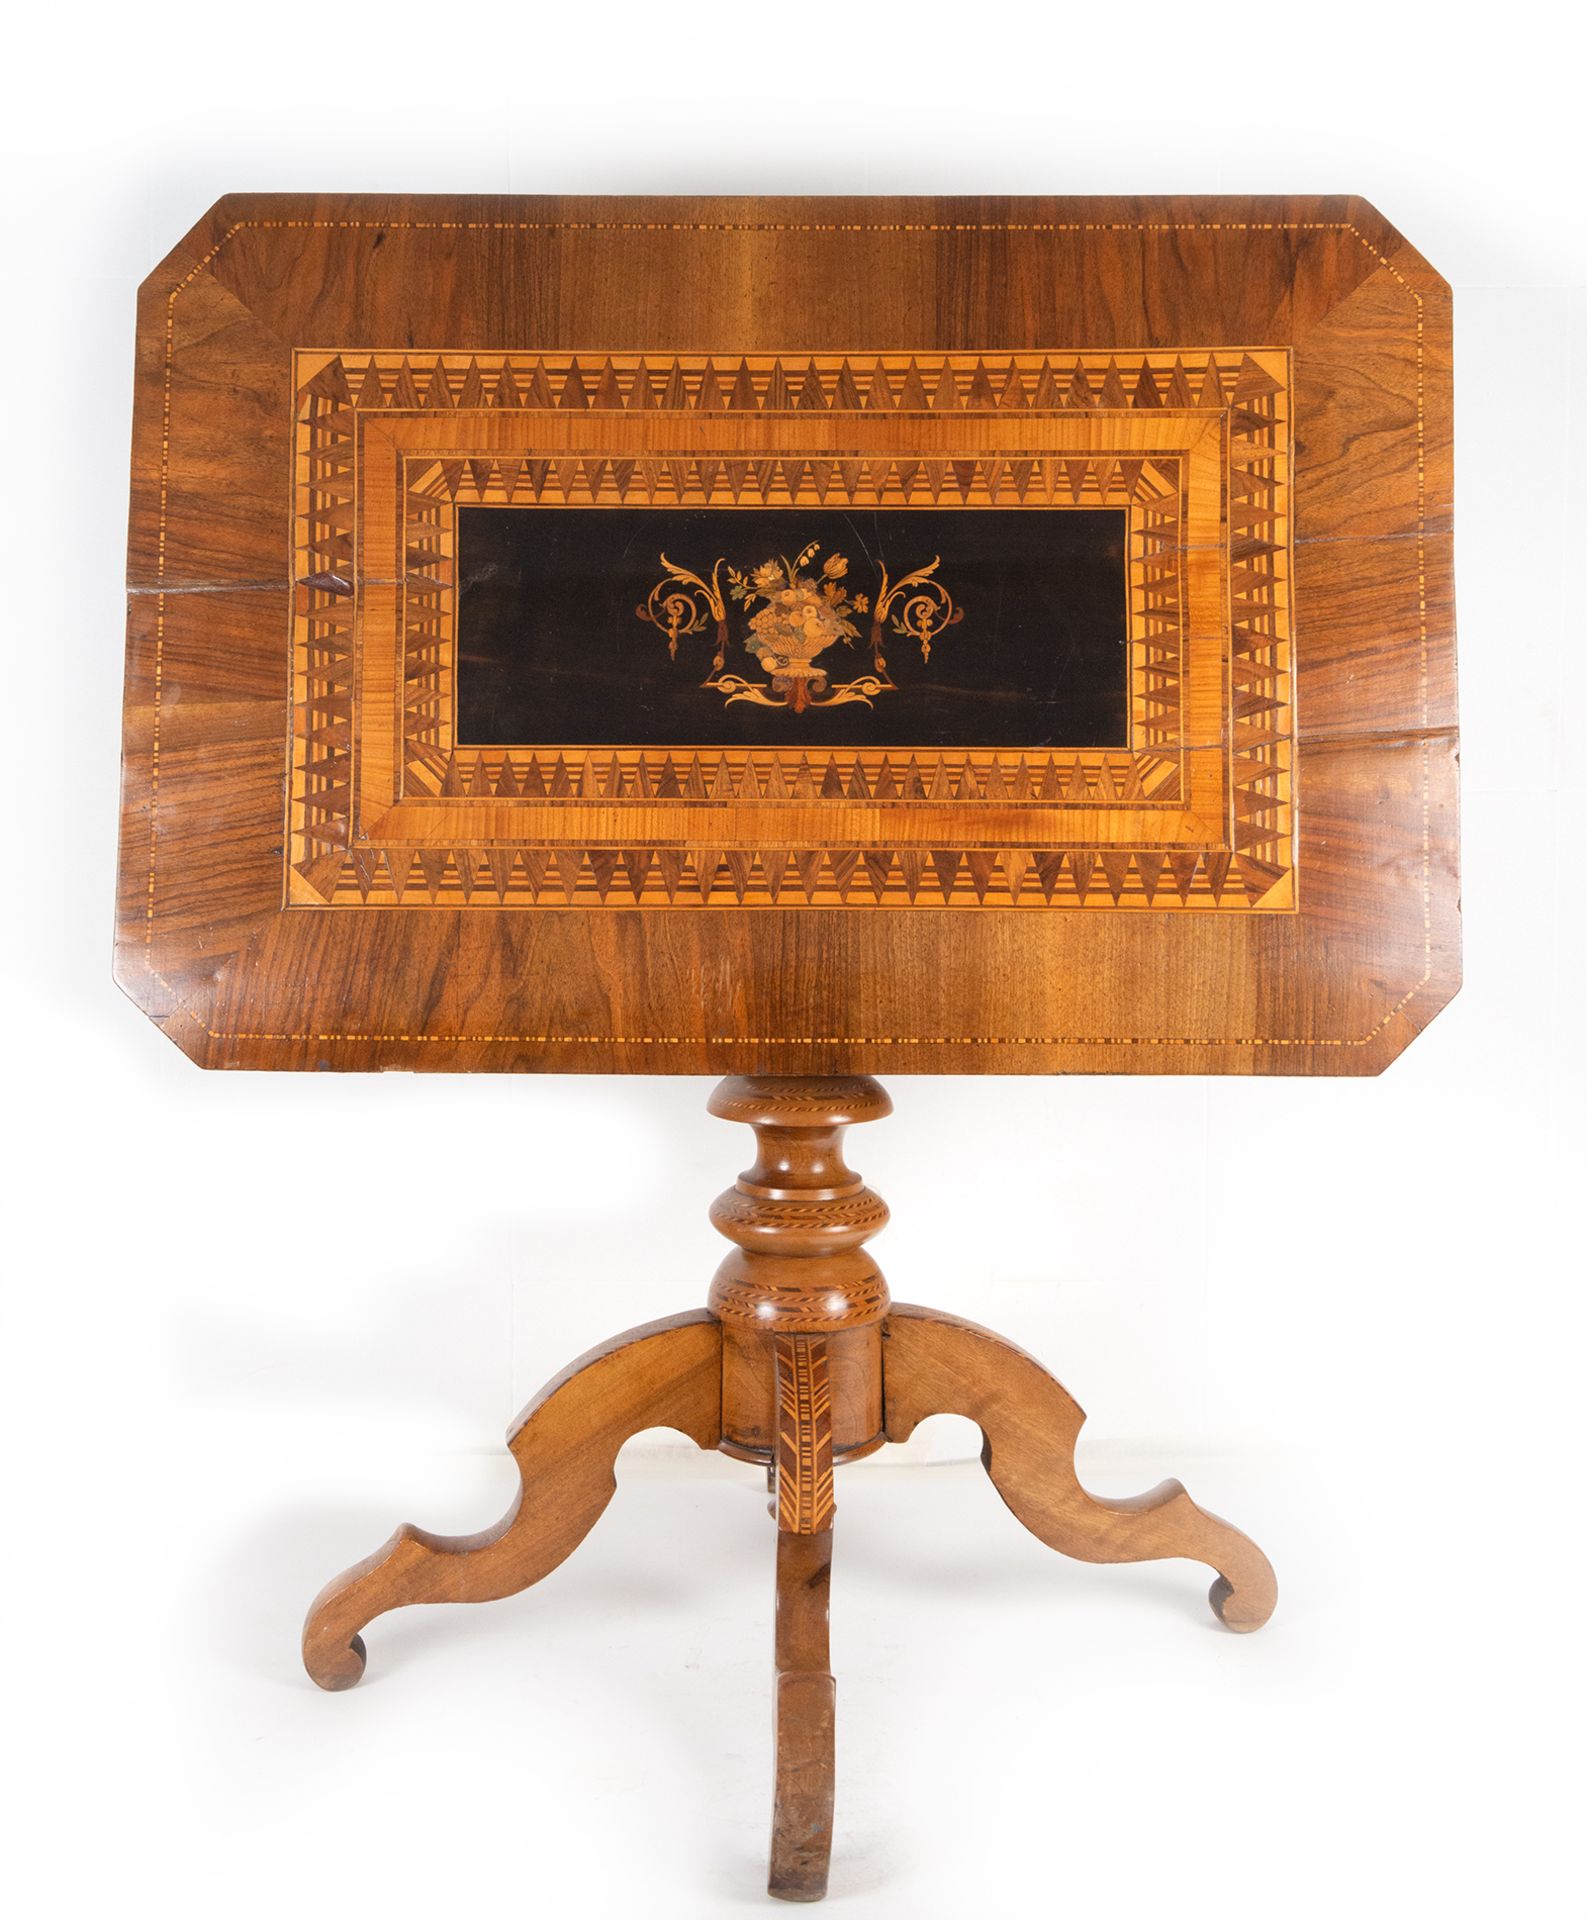 Important side table in marquetry, Carlos IV period, 18th - 19th centuries